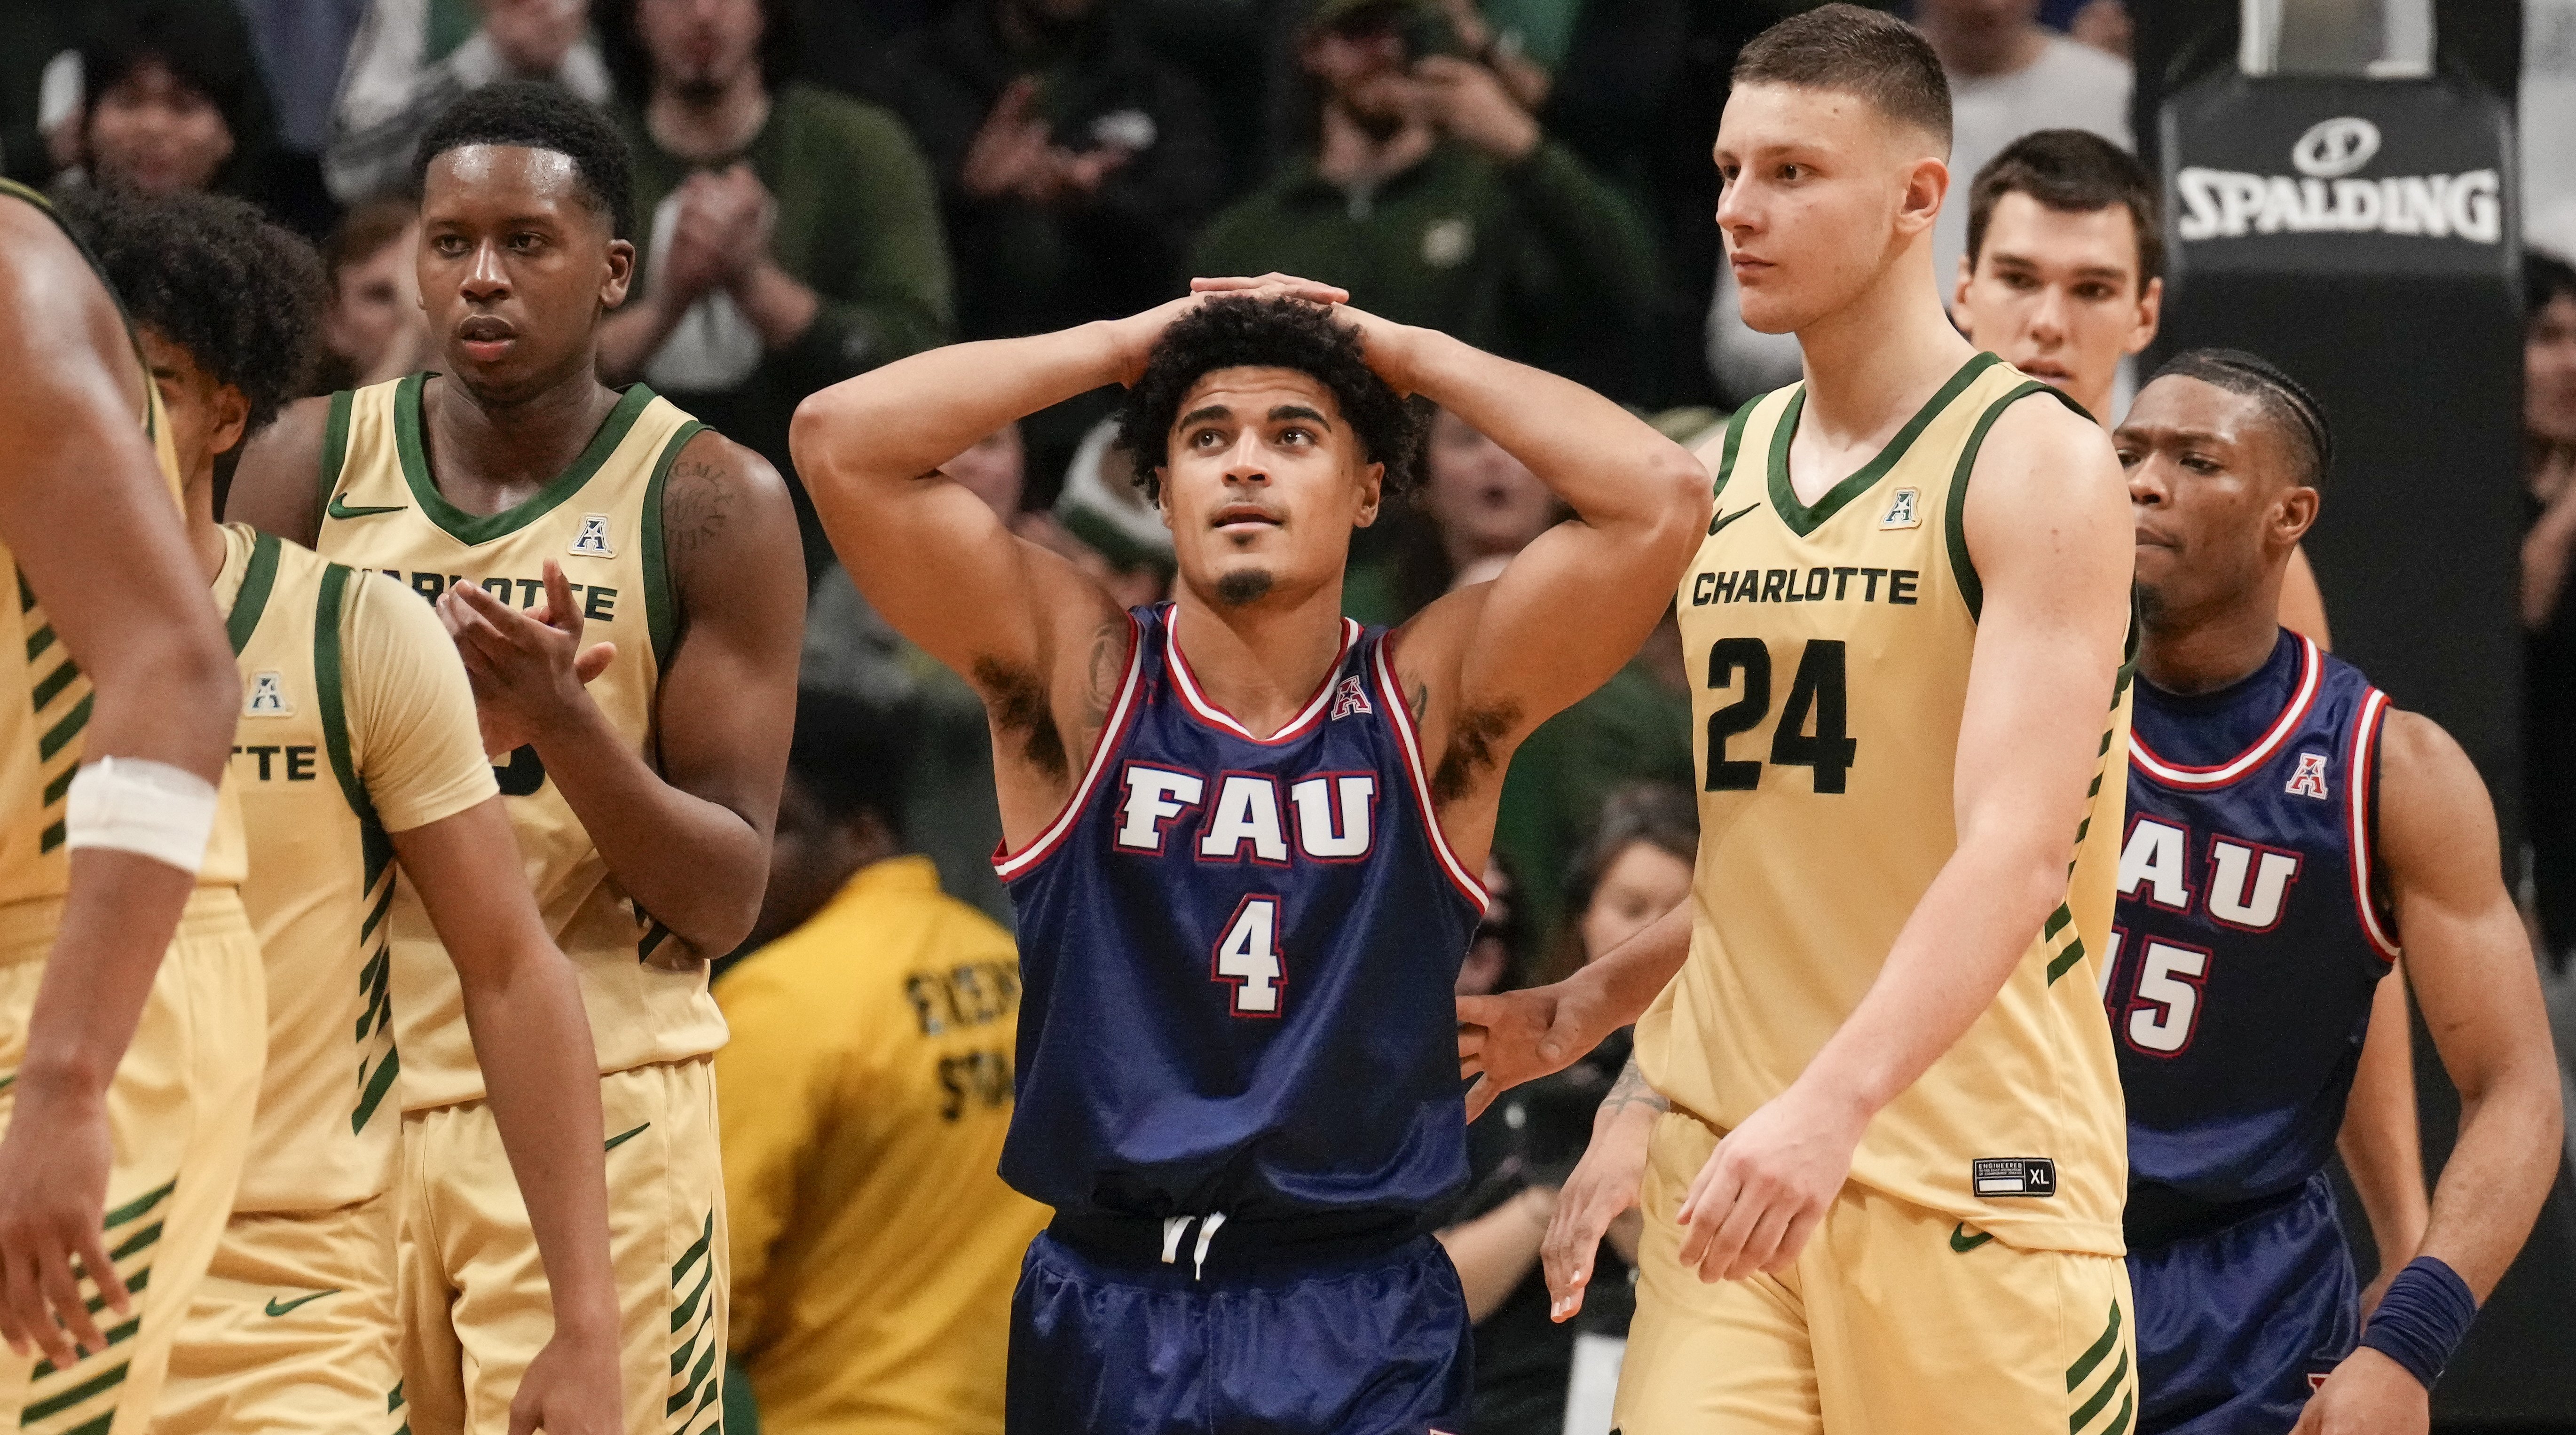 Florida Atlantic guard Bryan Greenlee, center, reacts to his foul that takes Charlotte  to the line for the winning free throws.